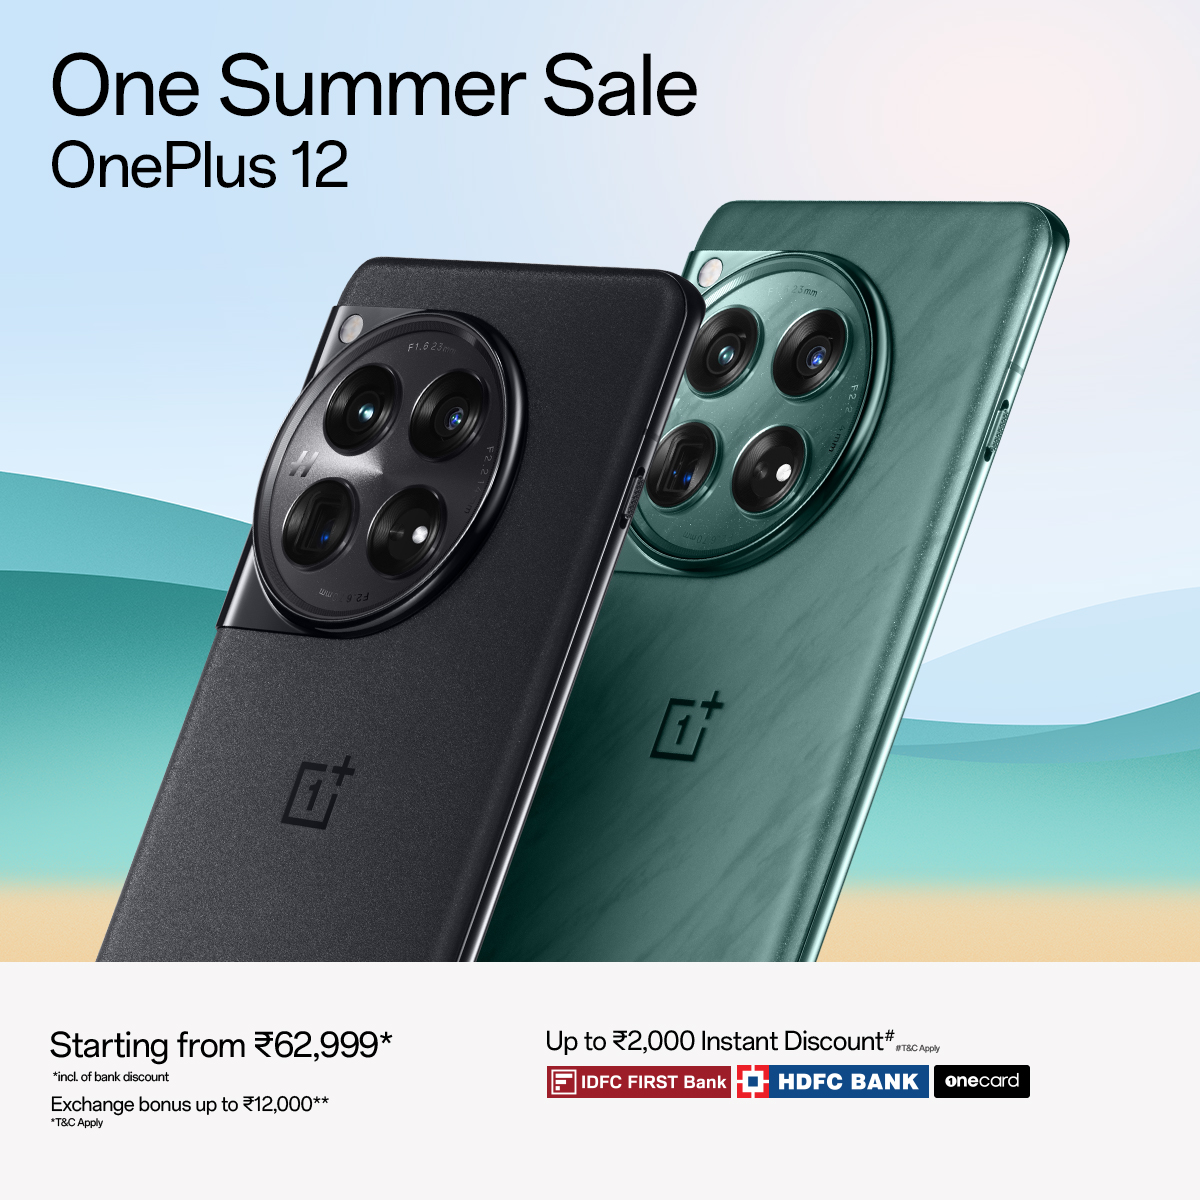 Upgrade your summer look with OnePlus 12. Get amazing offers at> onepl.us/3UI1Ury #onesummersale